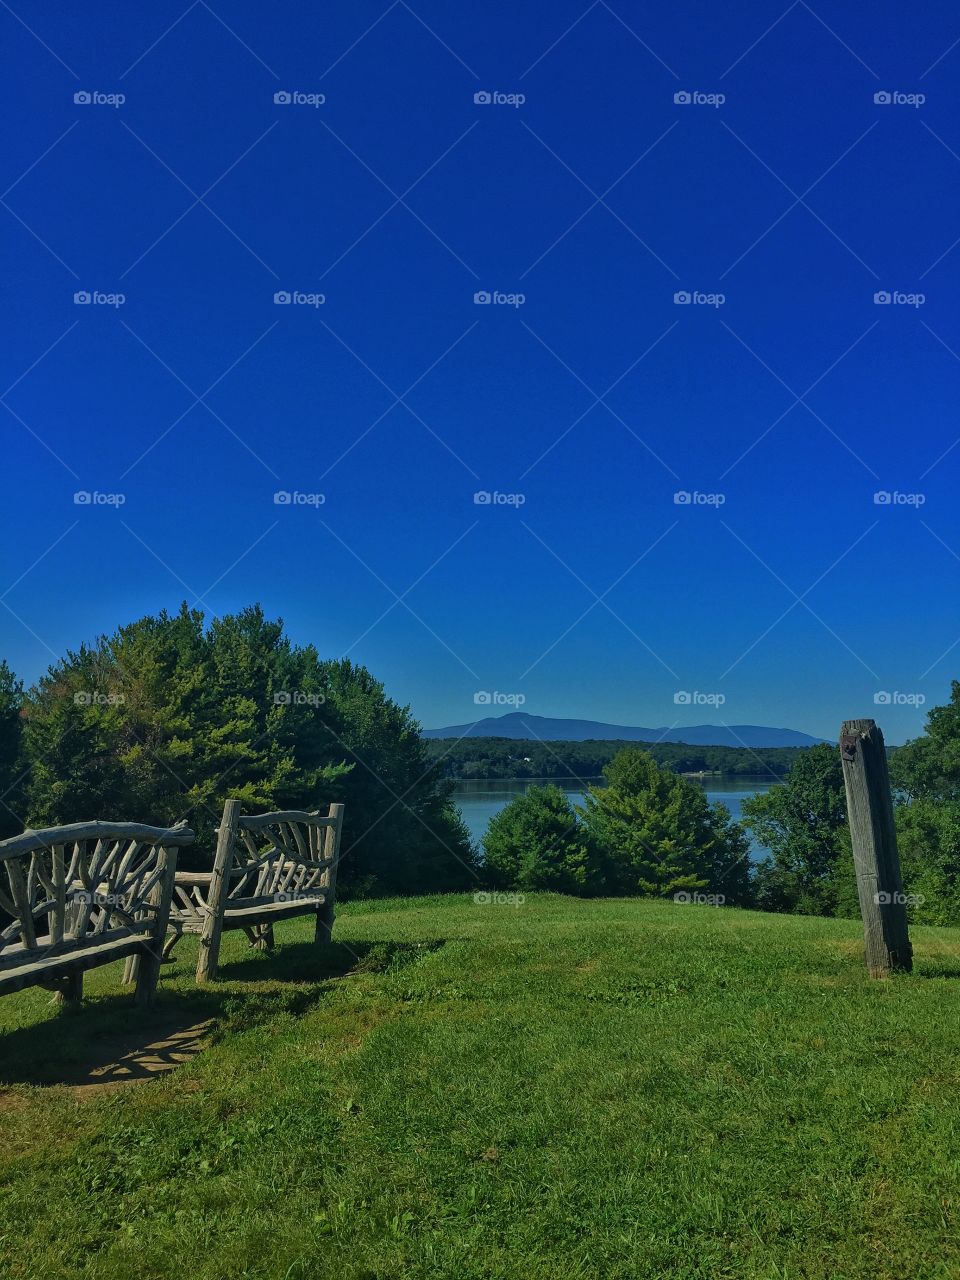 Hill over the river. A hill with rustic wooden benches overlooking the Hudson River in Rhinebeck, New York. 